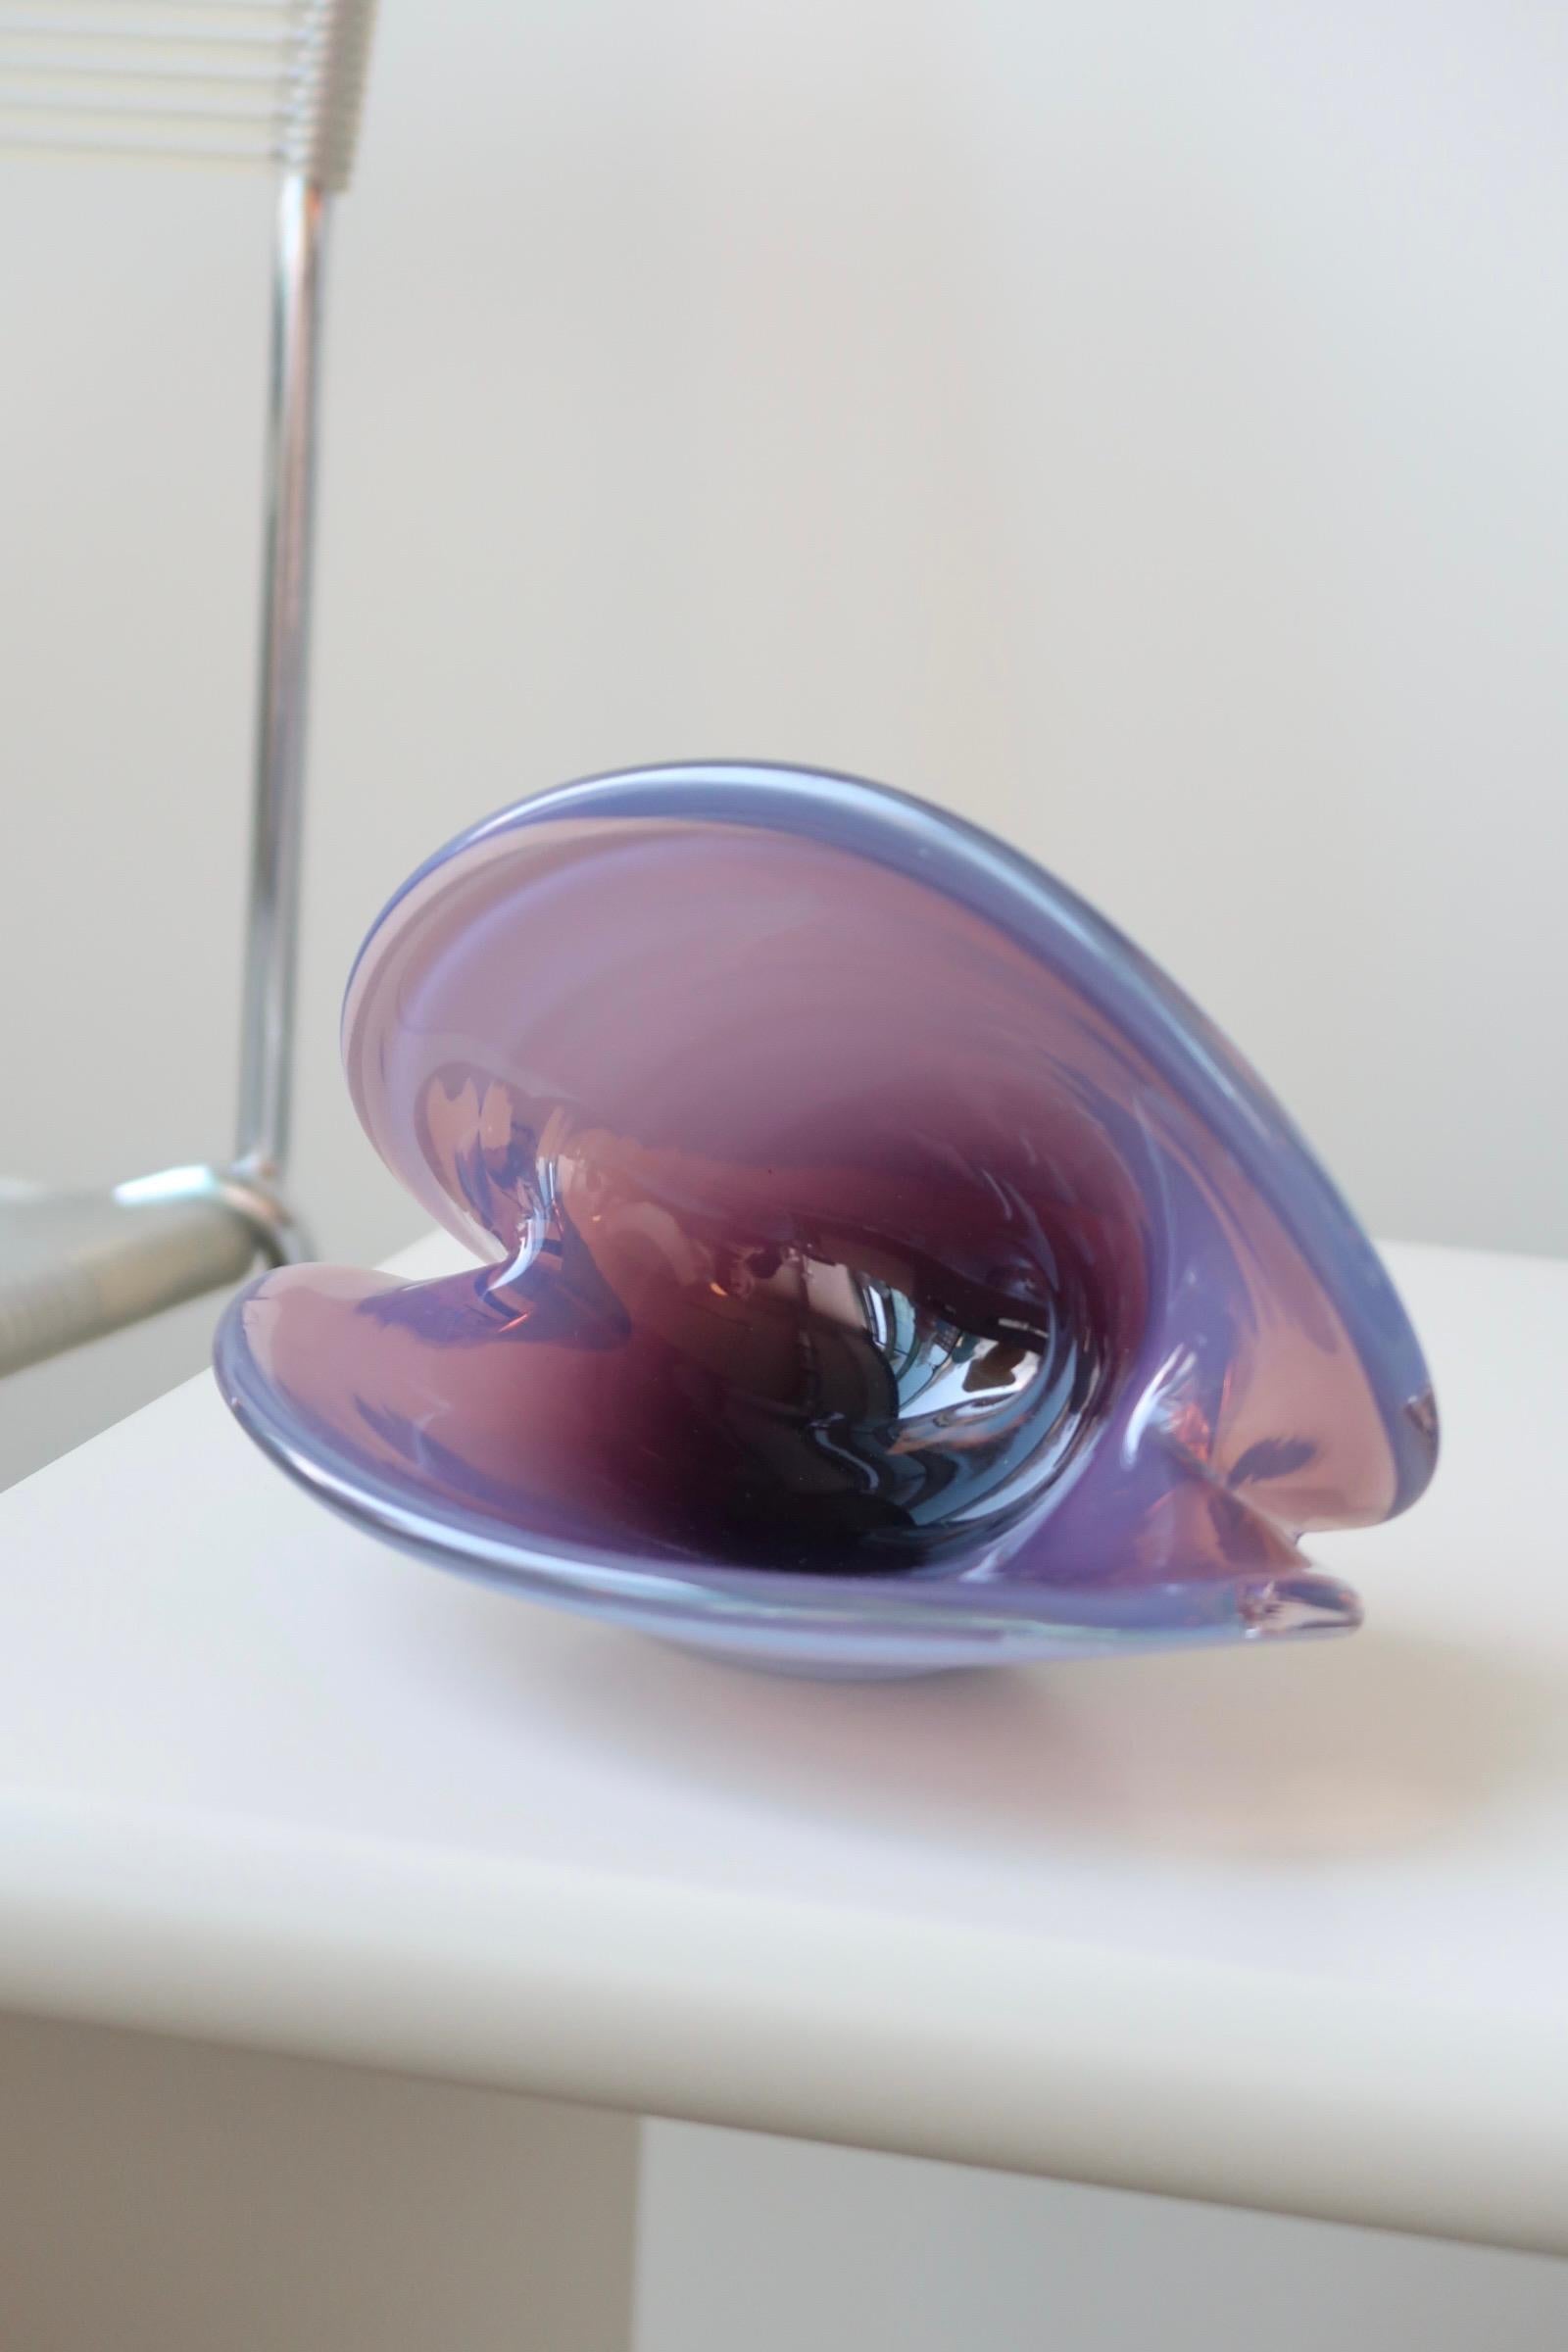 Vintage Murano clam bowl in a beautiful shade of purple. Mouth-blown glass in the shape of a clam. The bowl has two bases and can therefore both stand upright or rest on its side. Handmade in Italy, 1960s-1970s.

L: 18.5cm H:9cm 

